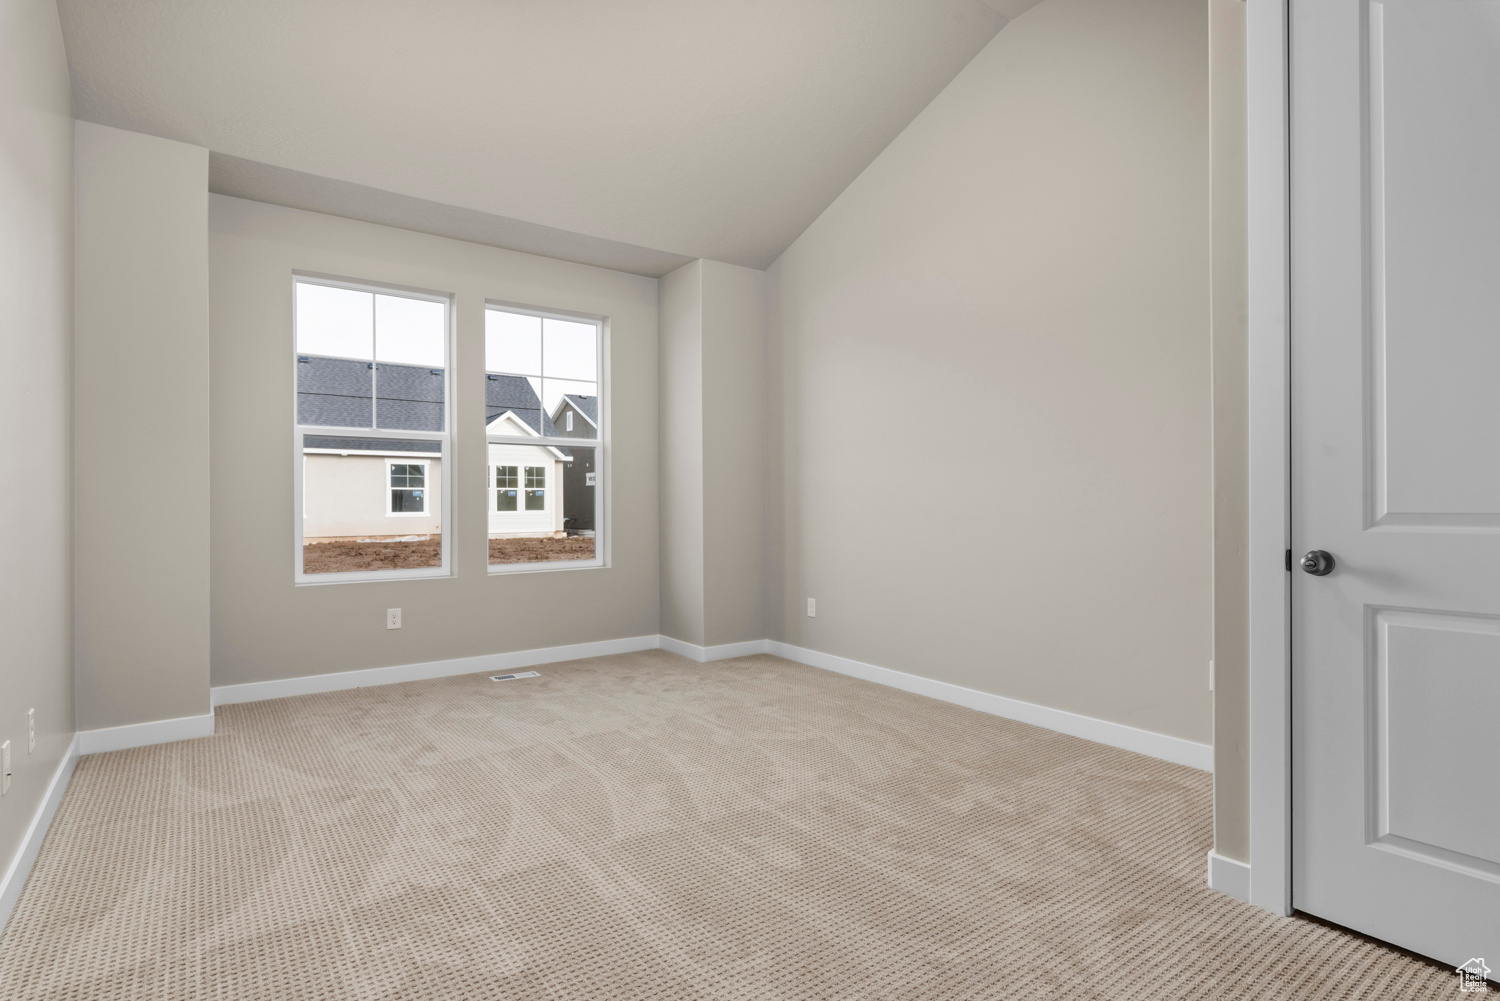 Empty room with light colored carpet and vaulted ceiling